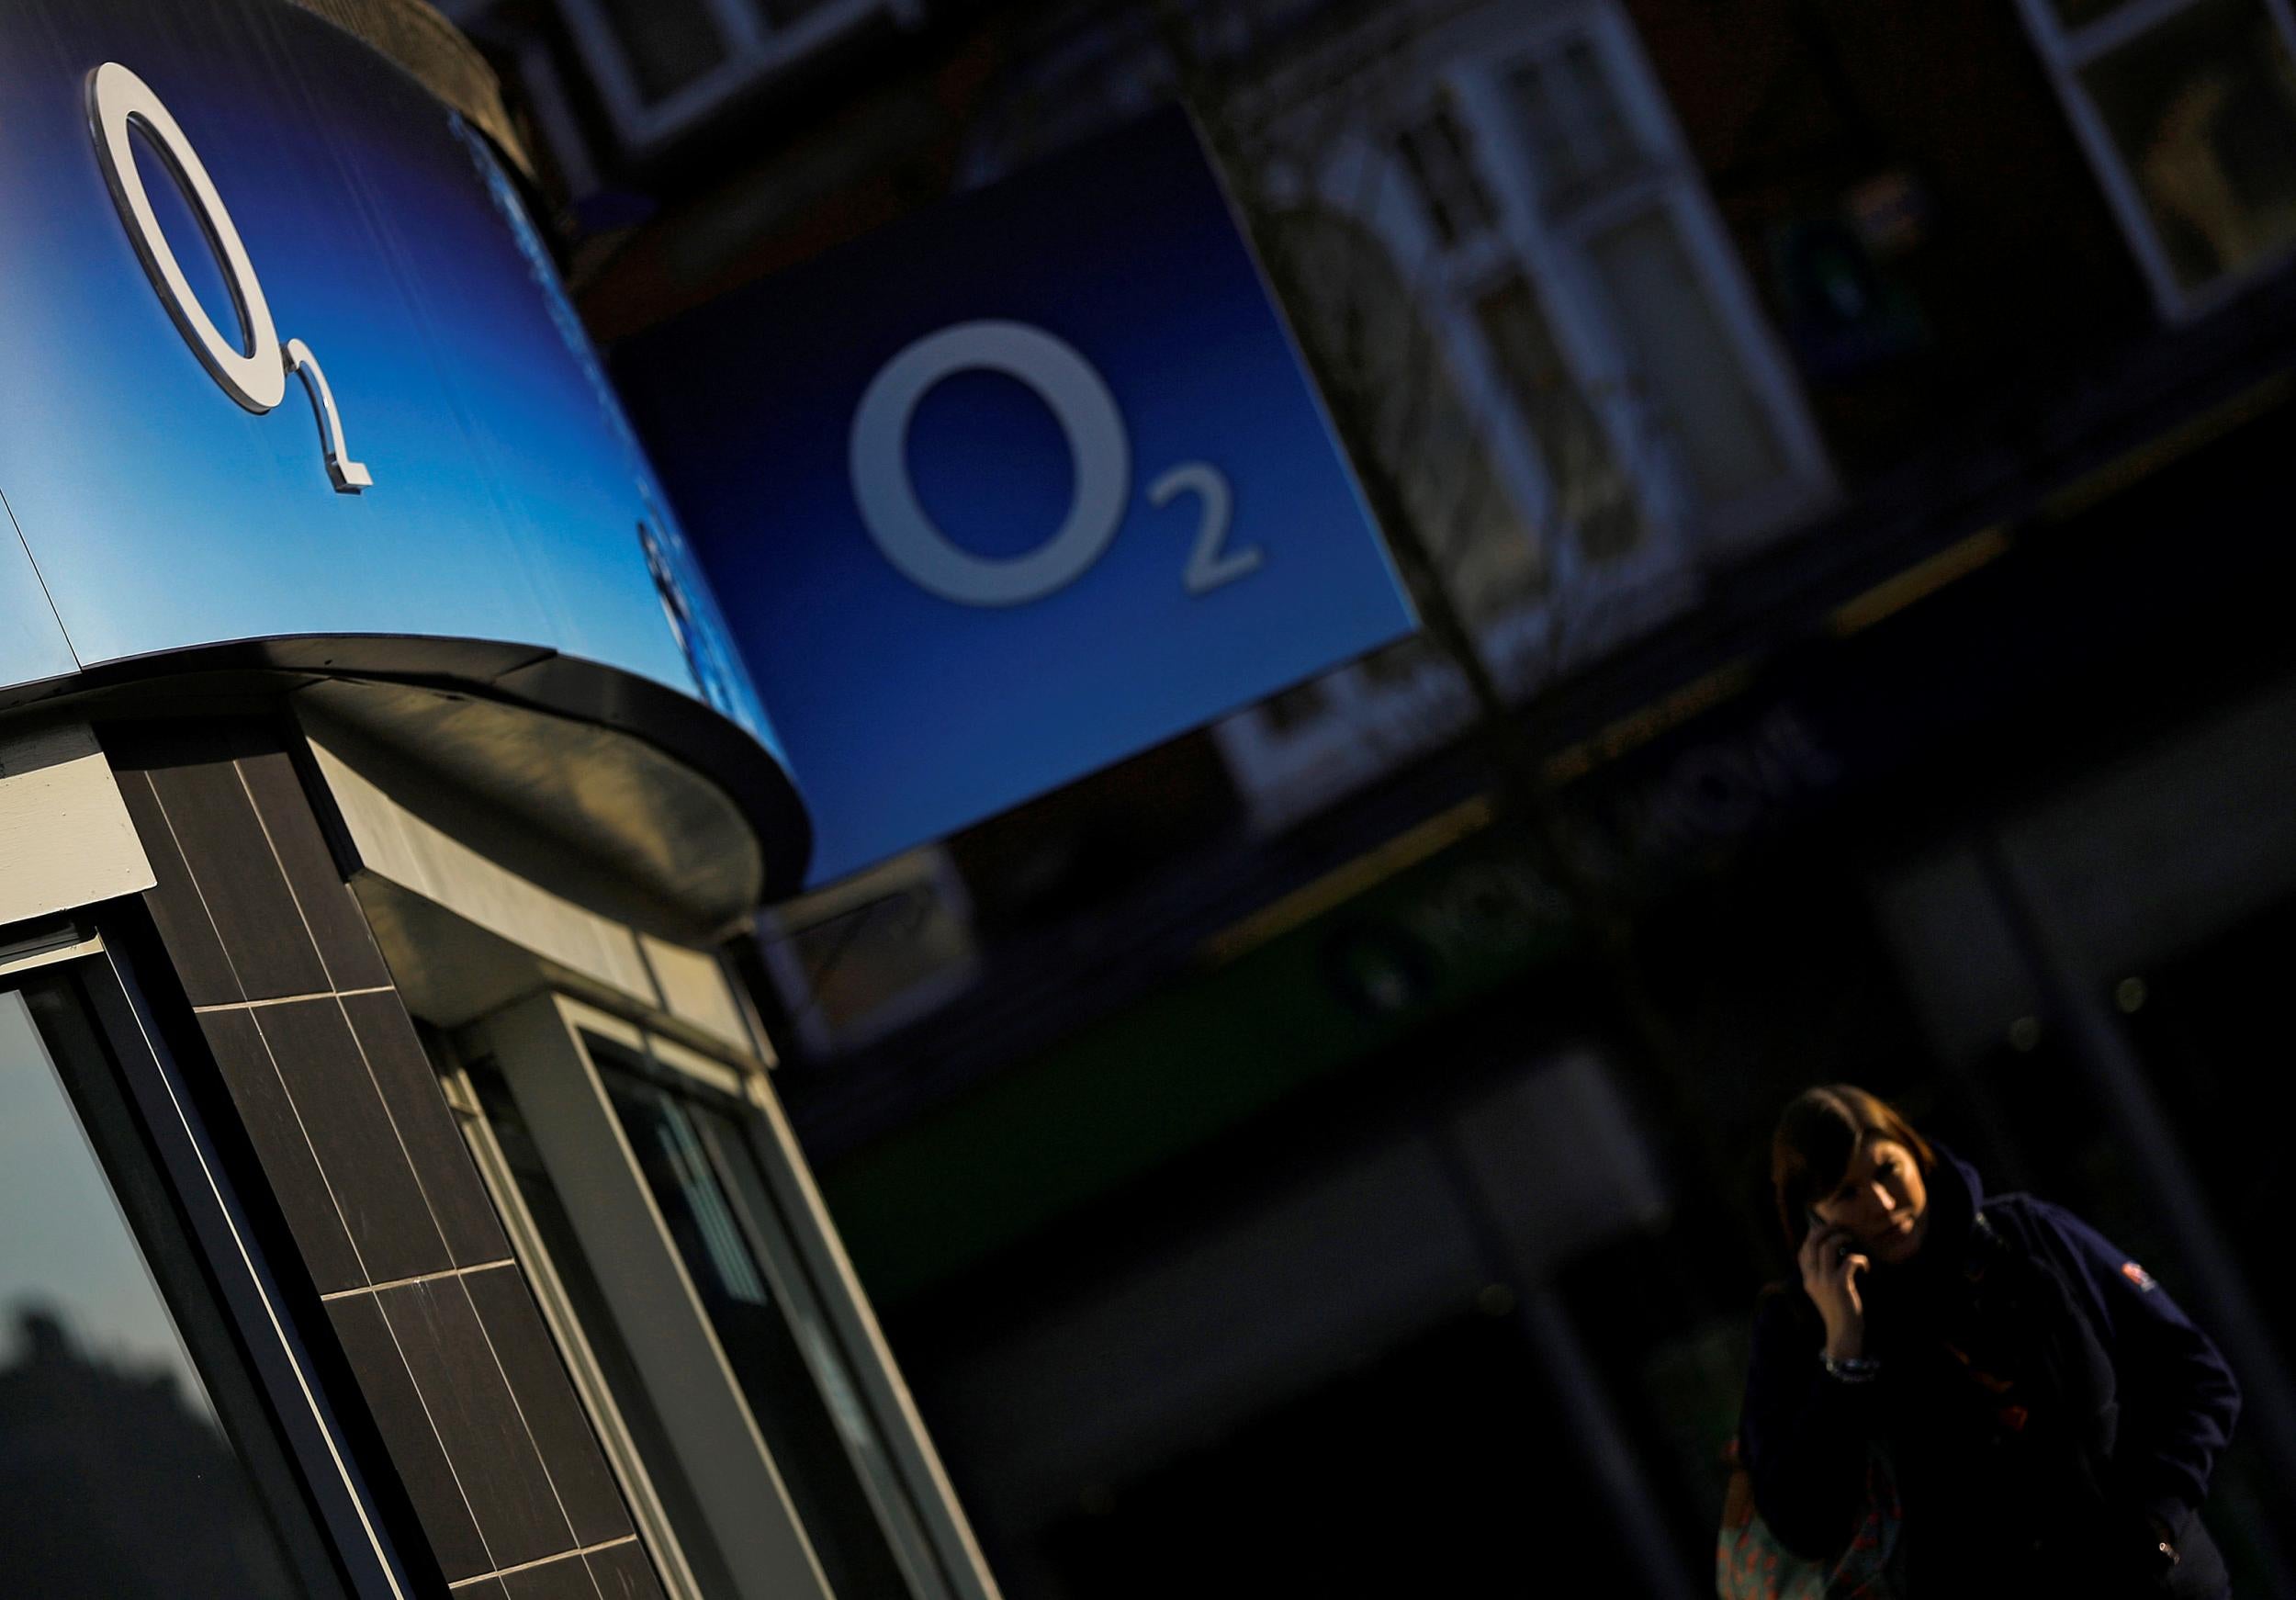 O2 execs are believed to have been put off by Brexit concerns